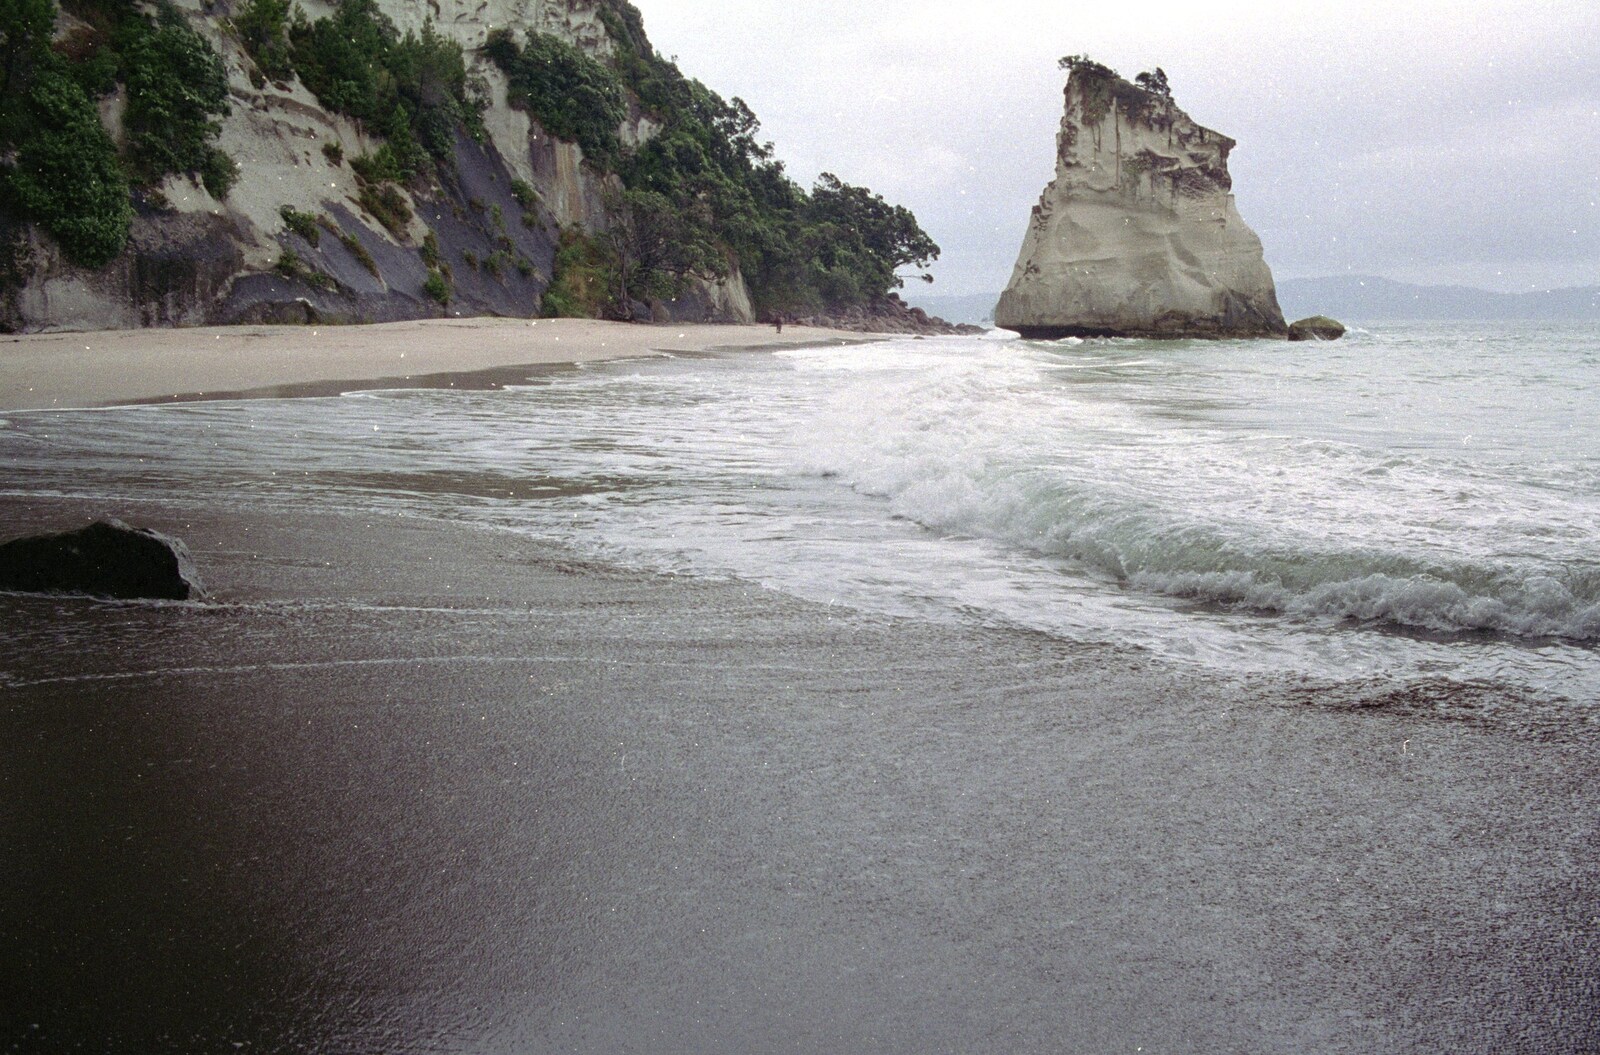 Cathedral cove from Ferry Landing, Whitianga, New Zealand - 23rd November 1992